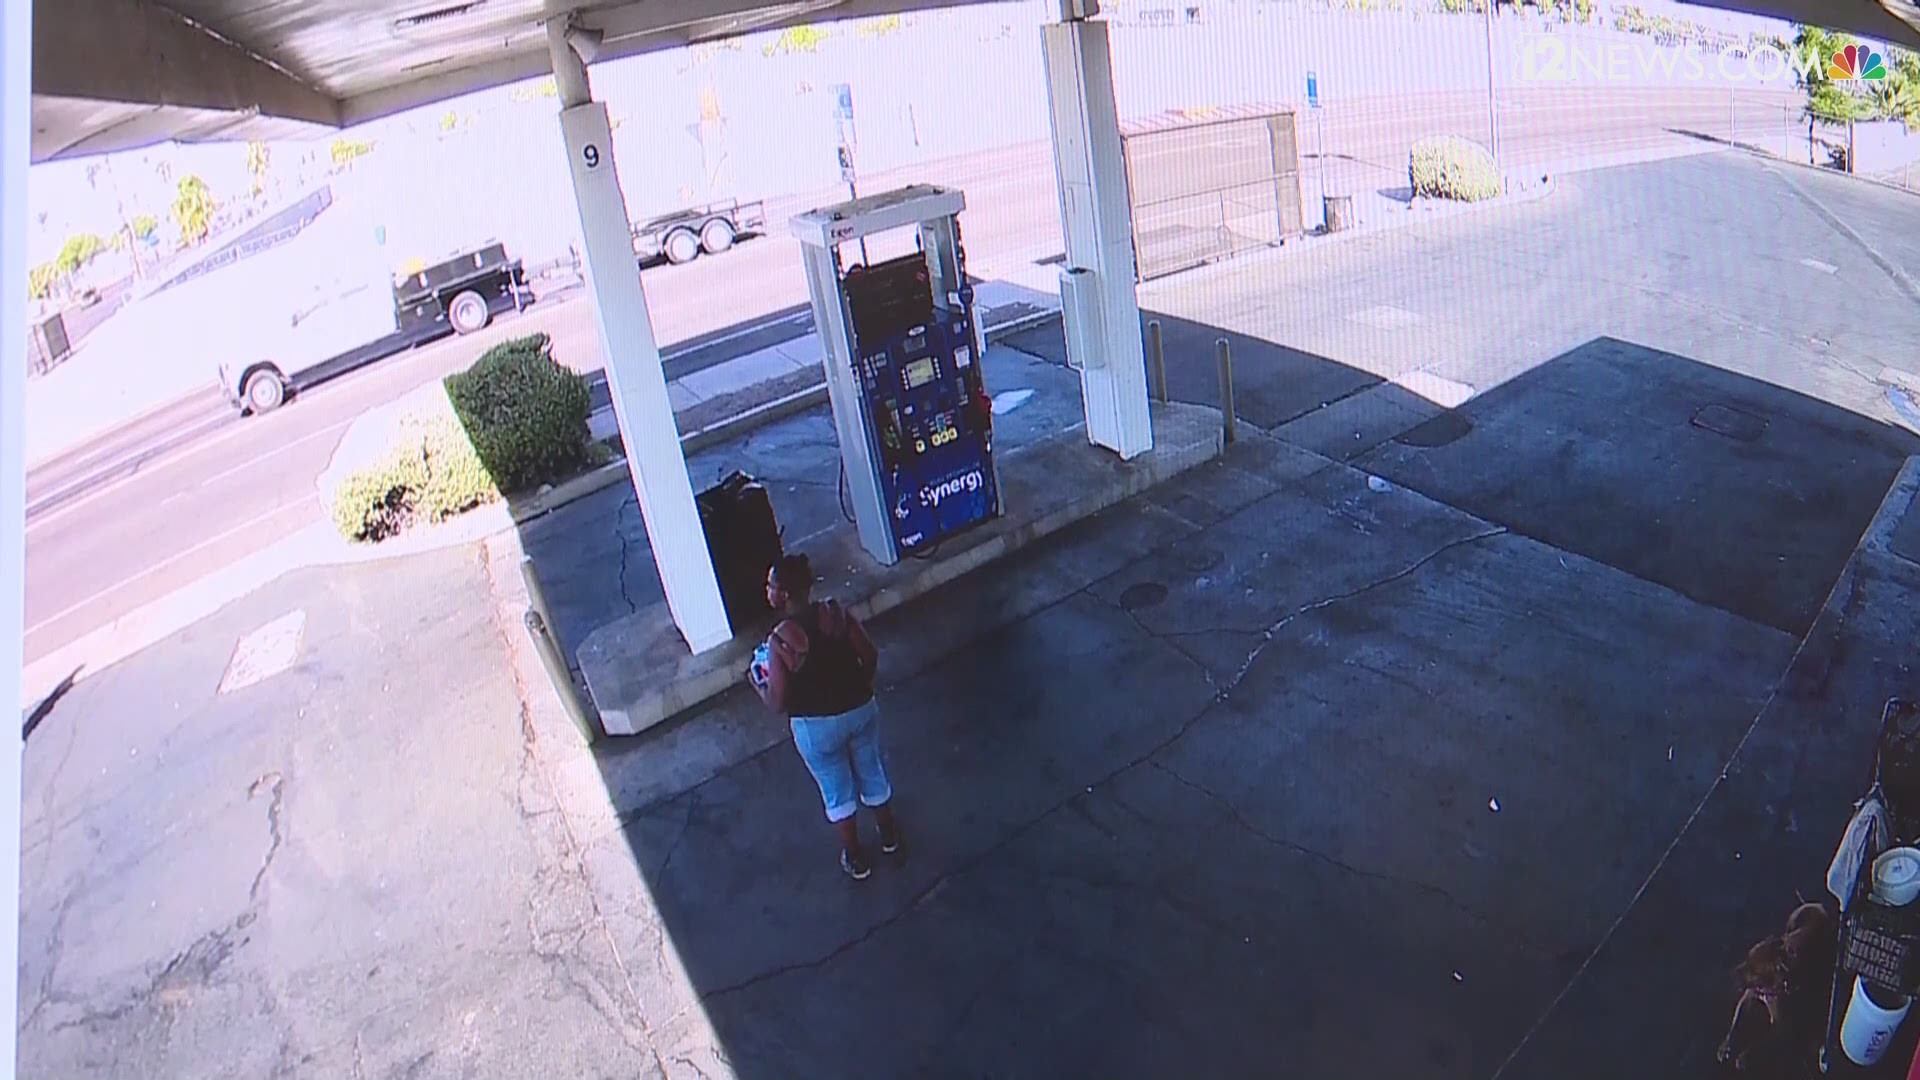 No one was injured after a car slammed into a bus stop in Phoenix on Friday, police said. This surveillance video is courtesy of the owner of the Exxon gas station at 32nd and Van Buren streets.